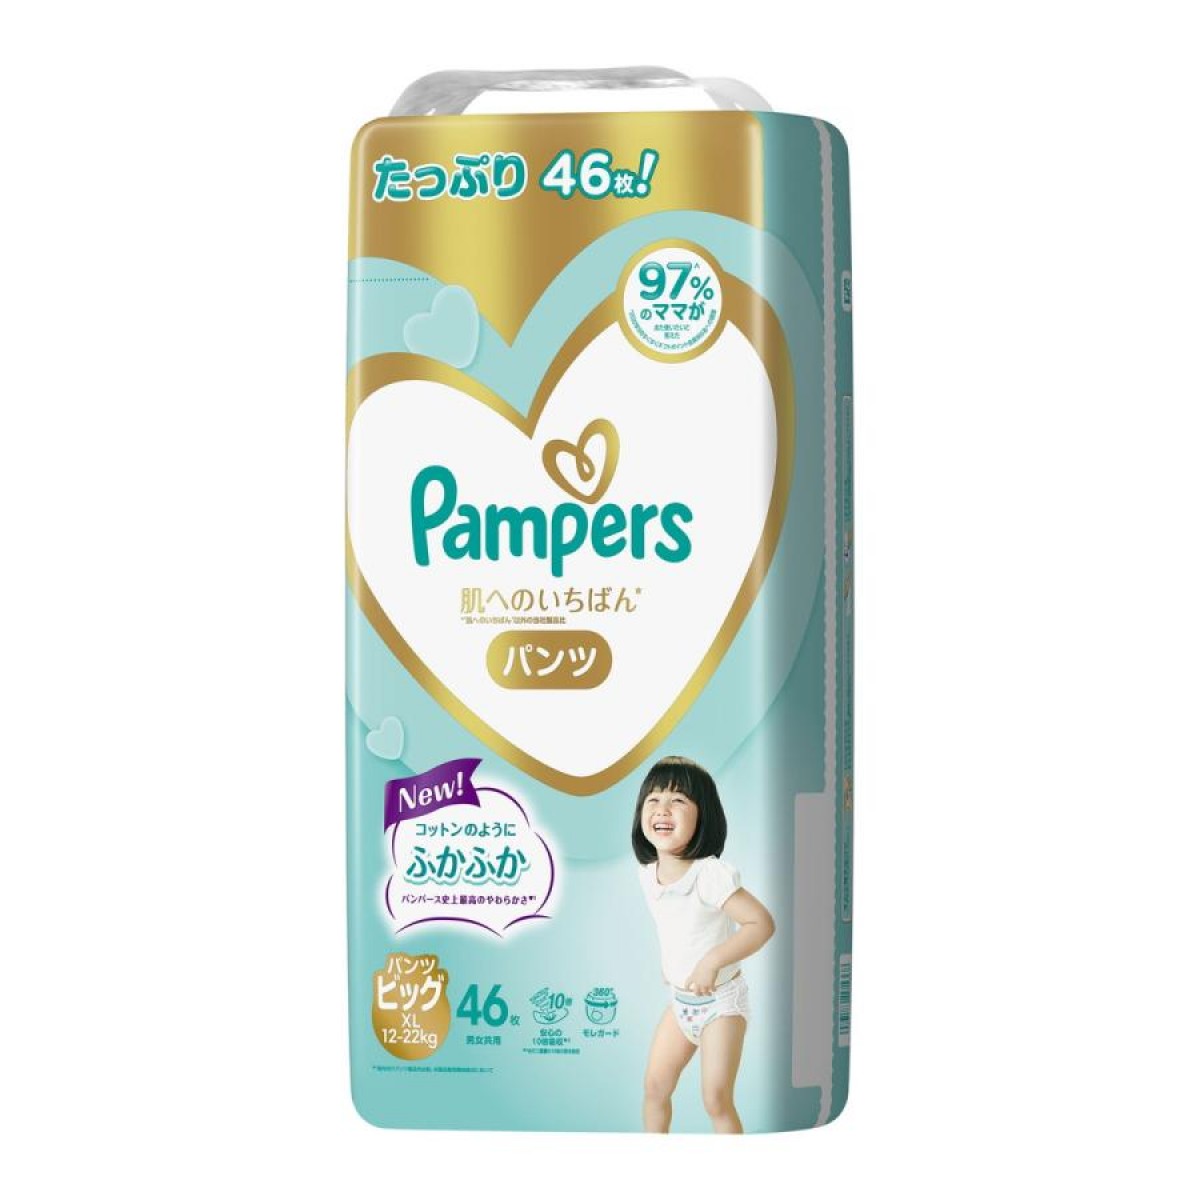 Pampers Premium Care Pants Diapers Monthly Box Pack (Medium, Pack of 108)  in Hyderabad at best price by Star Pamper Store - Justdial